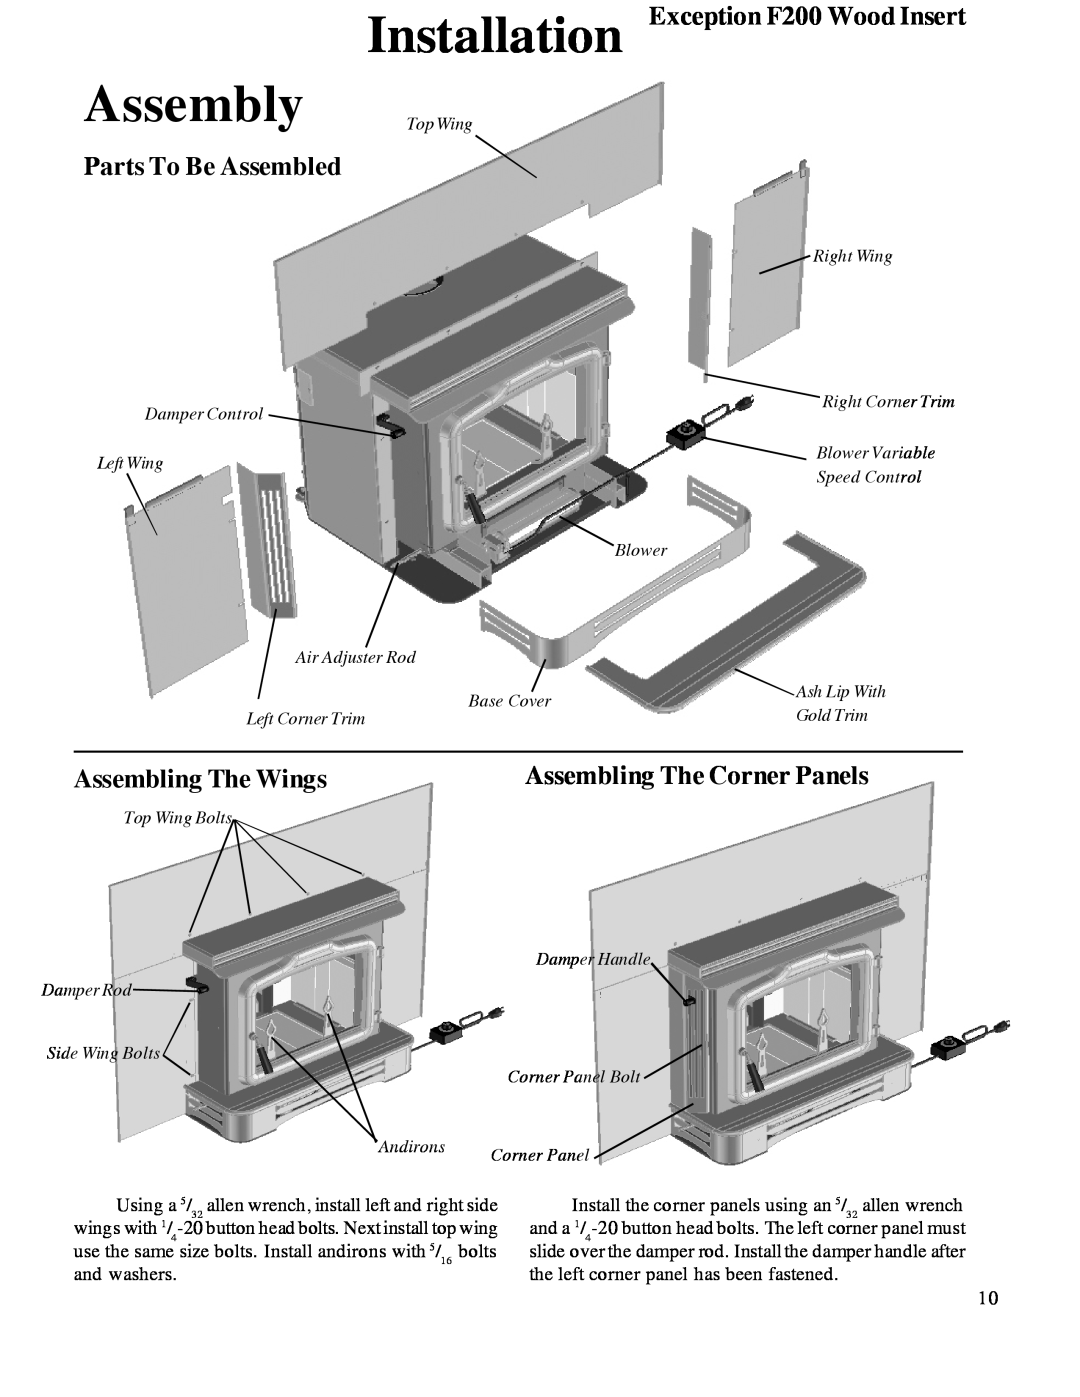 Harman Stove Company R7R1 Exception Wood Fireplace manual Assembly Top Wing, Installation Exception F200 Wood Insert 